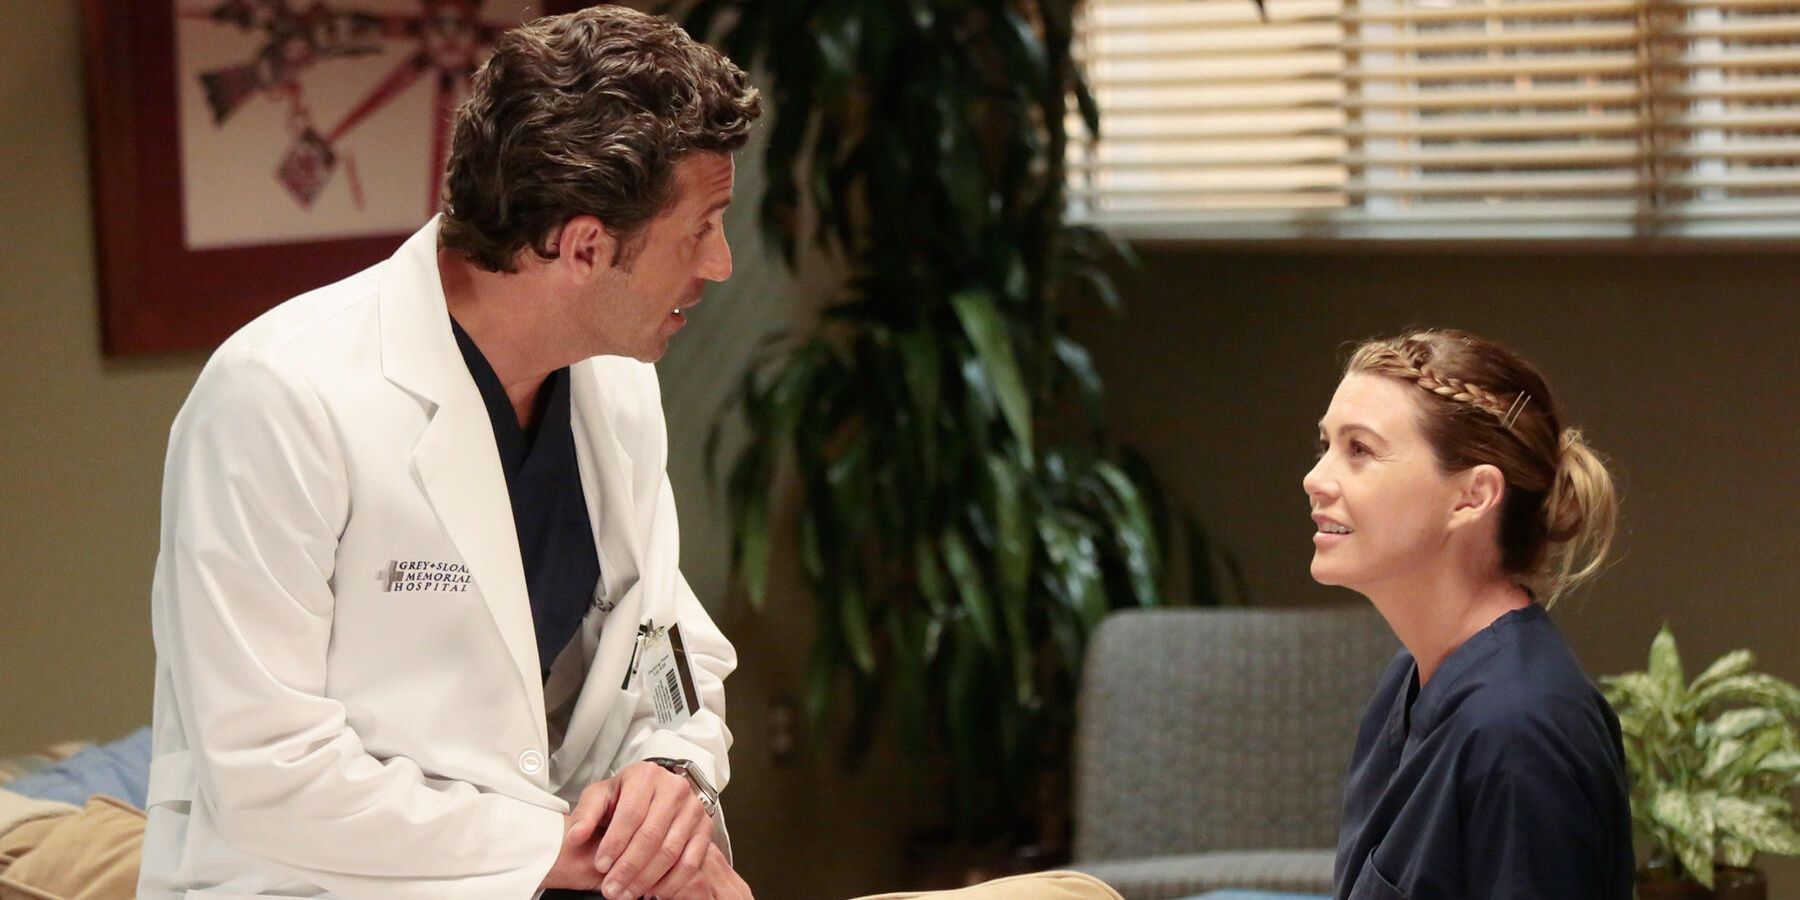 Derek and Meredith talking at the hospital on Grey's Anatomy